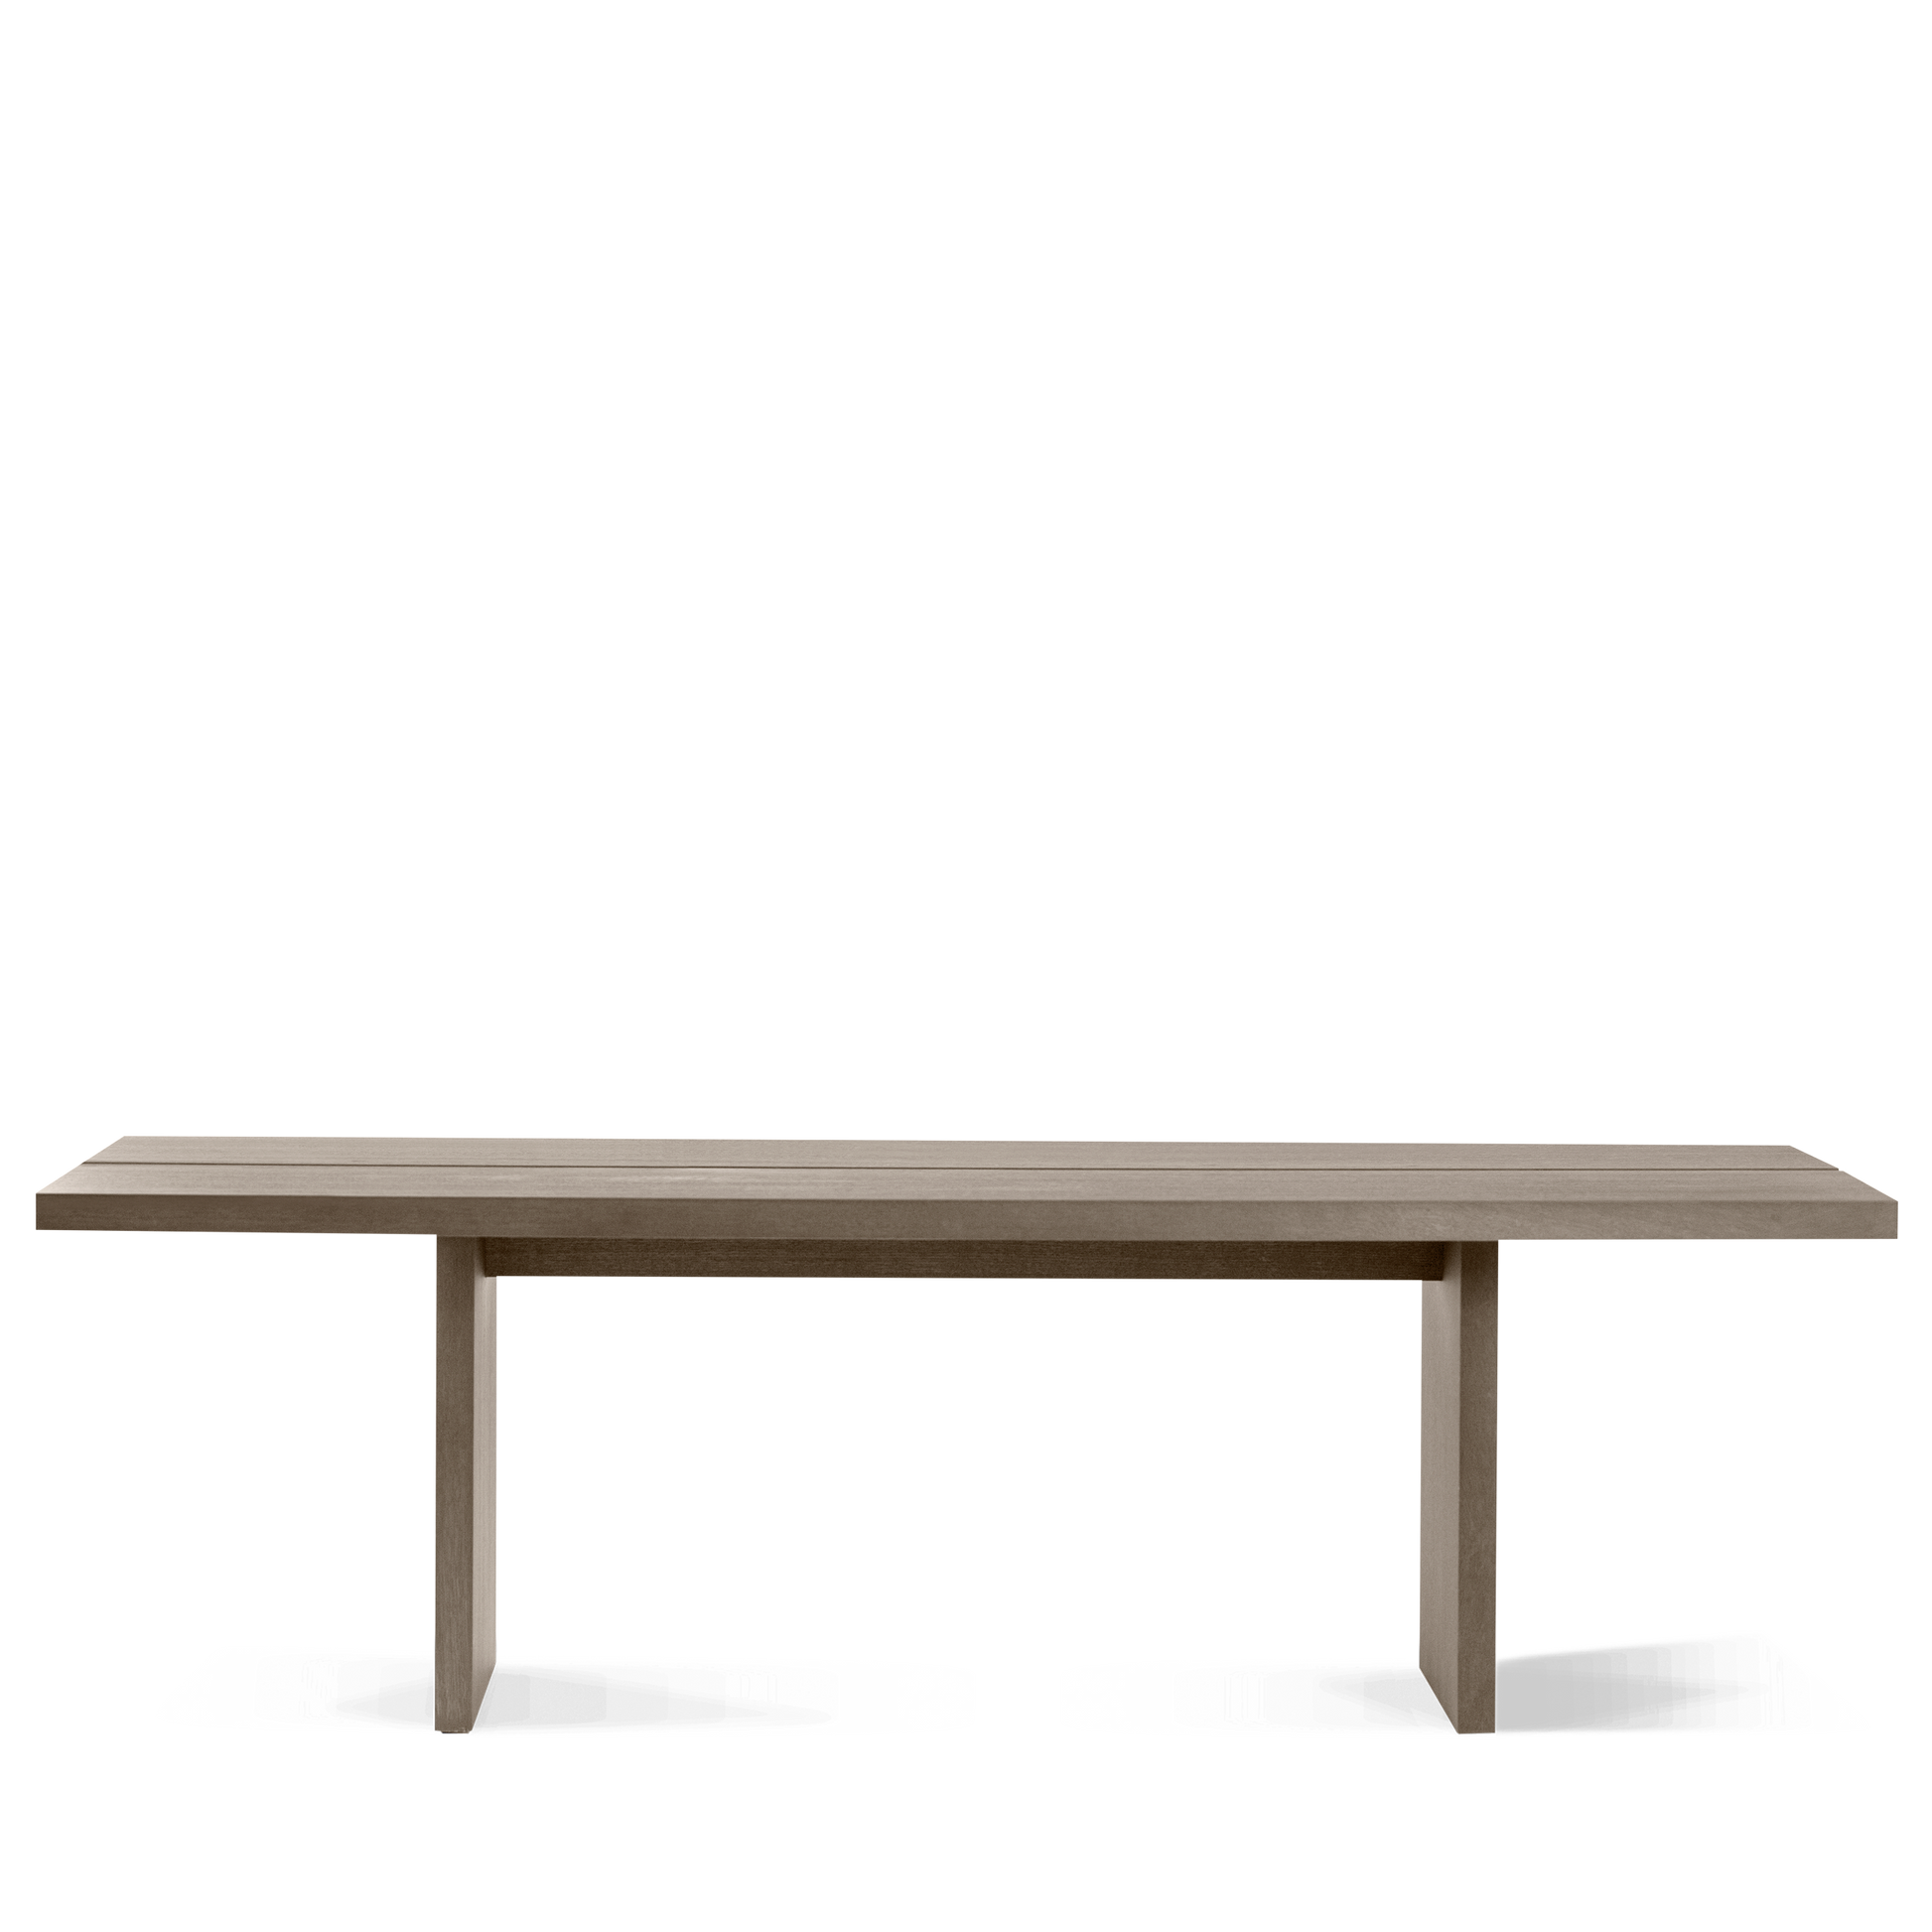 Side view ATALAYA Dining table with natural wood